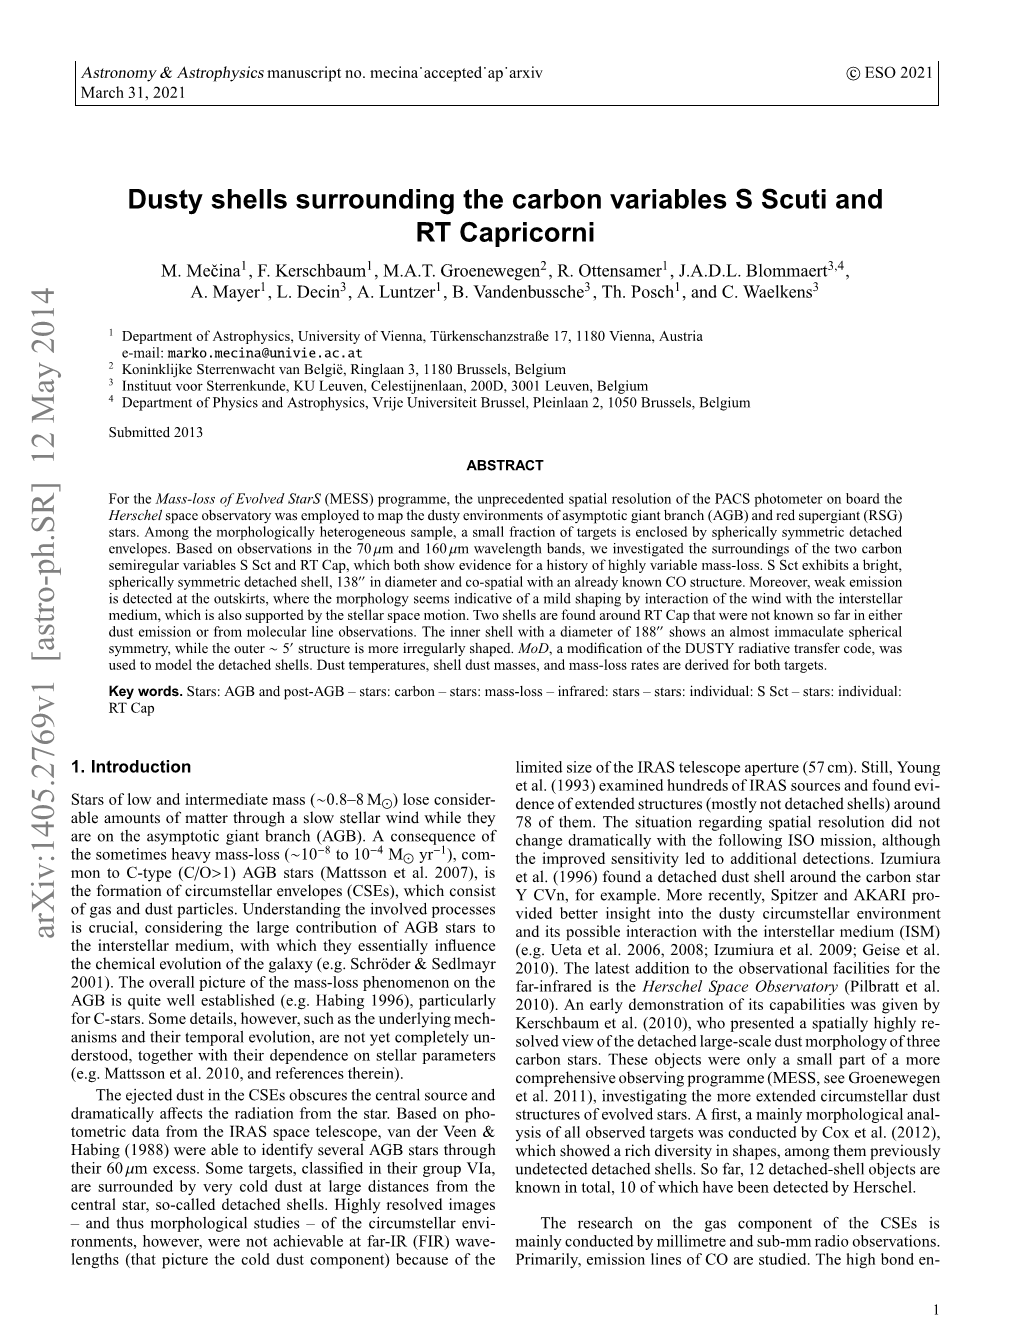 Dusty Shells Surrounding the Carbon Variables S Scuti and RT Capricorni Ergy of the Molecule Prevents Its Quick (Photo-)Dissociation and Table 1